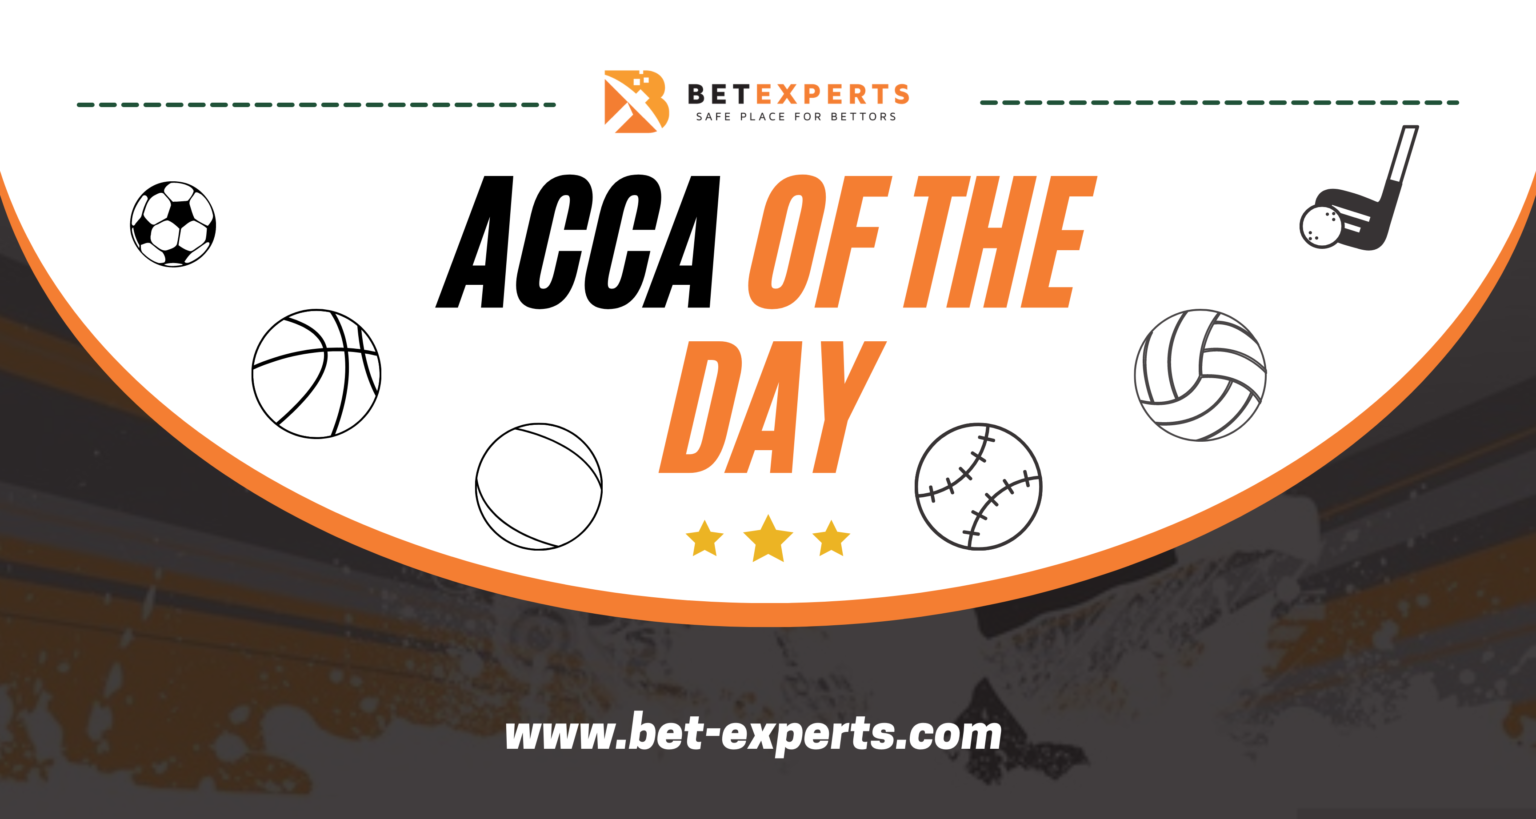 Acca of the day for Sunday - 27.11.2022 by Bet Experts